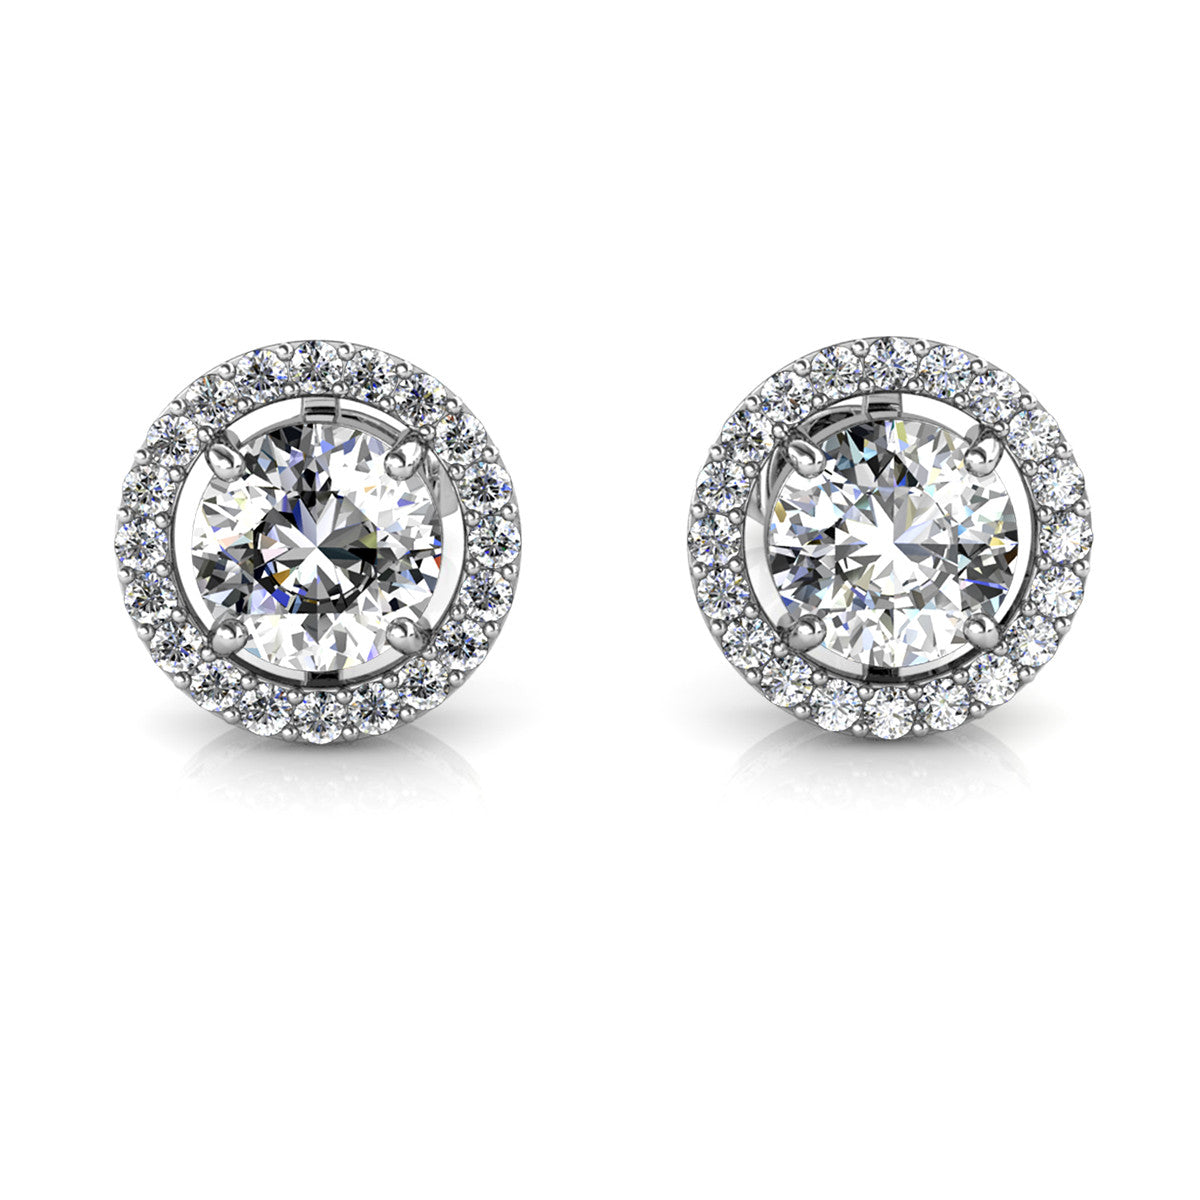 Moissanite by Cate & Chloe Kailani Sterling Silver Stud Earrings with Moissanite and 5A Cubic Zirconia Crystals